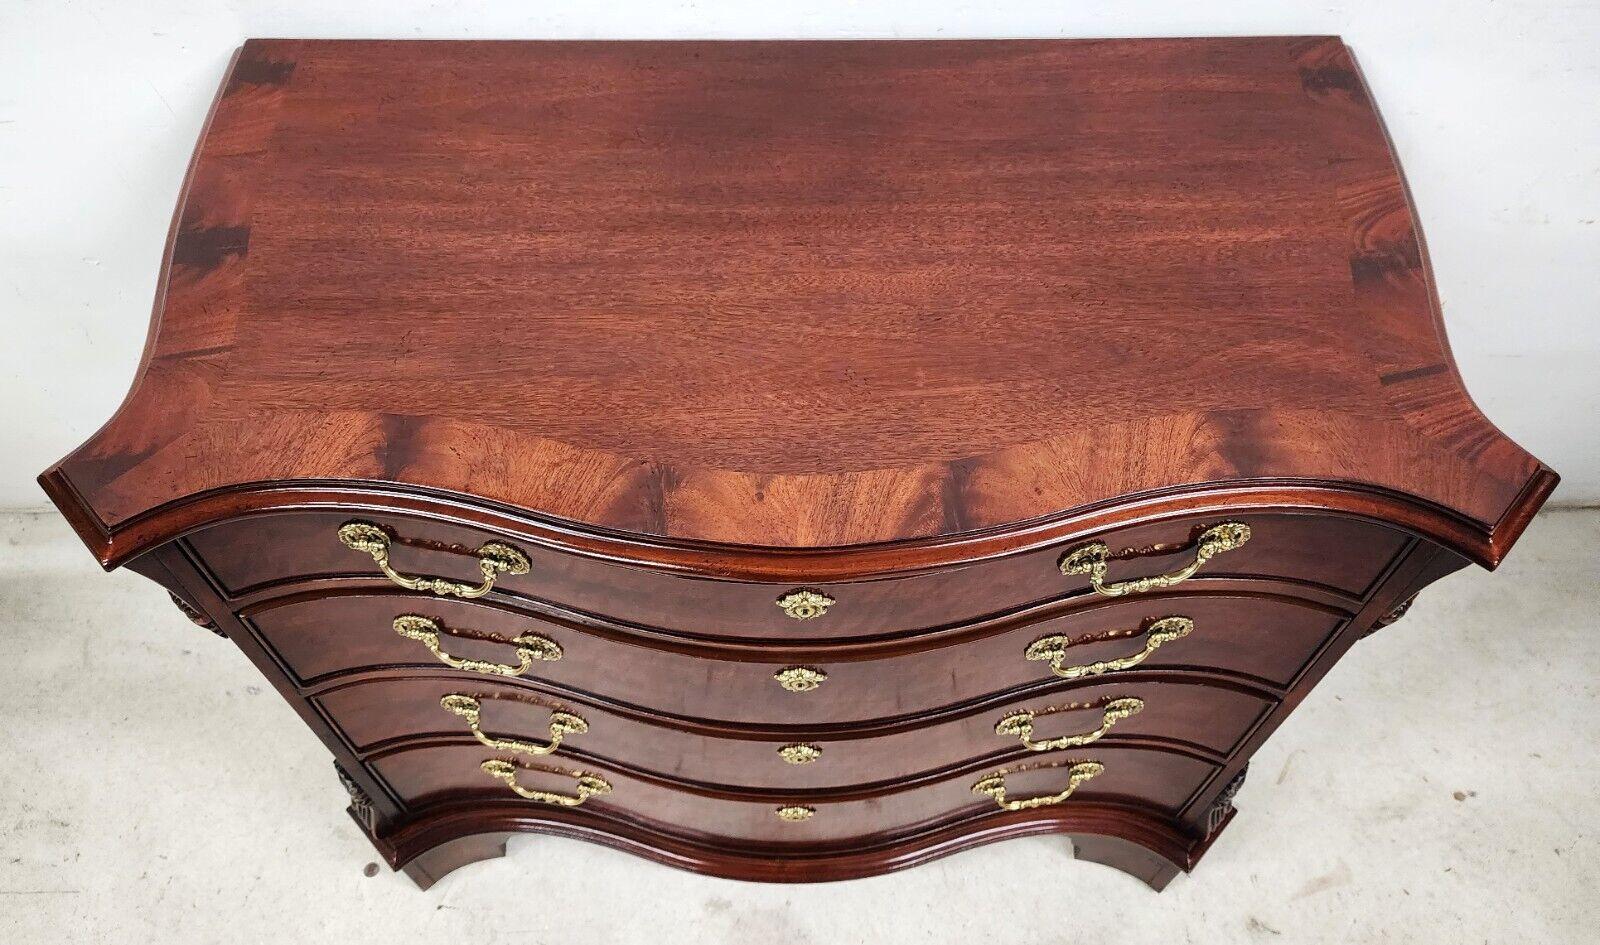 Offering One of our recent palm beach estate fine furniture acquisitions of a
4 Drawer Bachelor Chest of Drawers Georgian Chippendale Style Mahogany by Henredon

Approximate Measurements in Inches
34